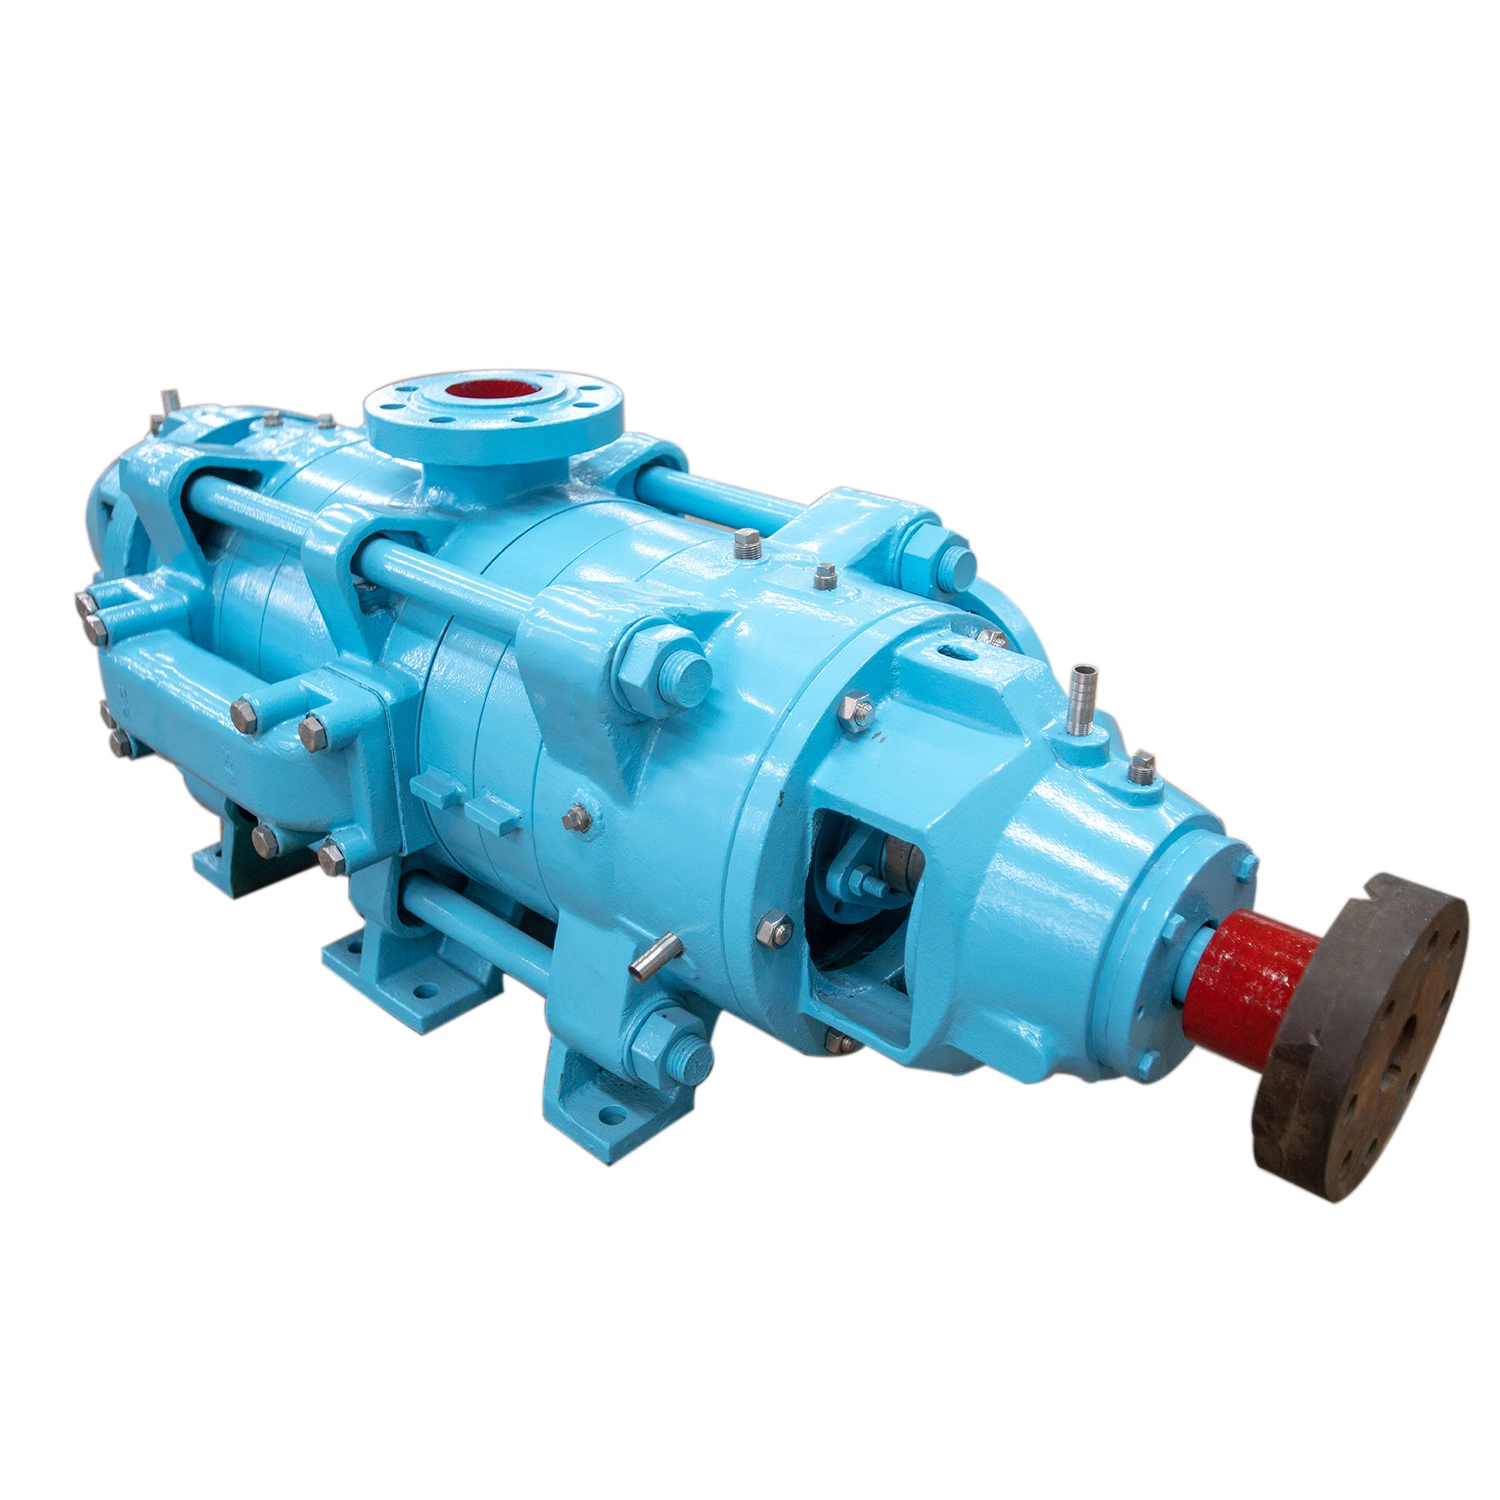 Self-Balancing Multistage Centrifugal Pump / Ring Section Pump Zd46-50 (3-12 stages)